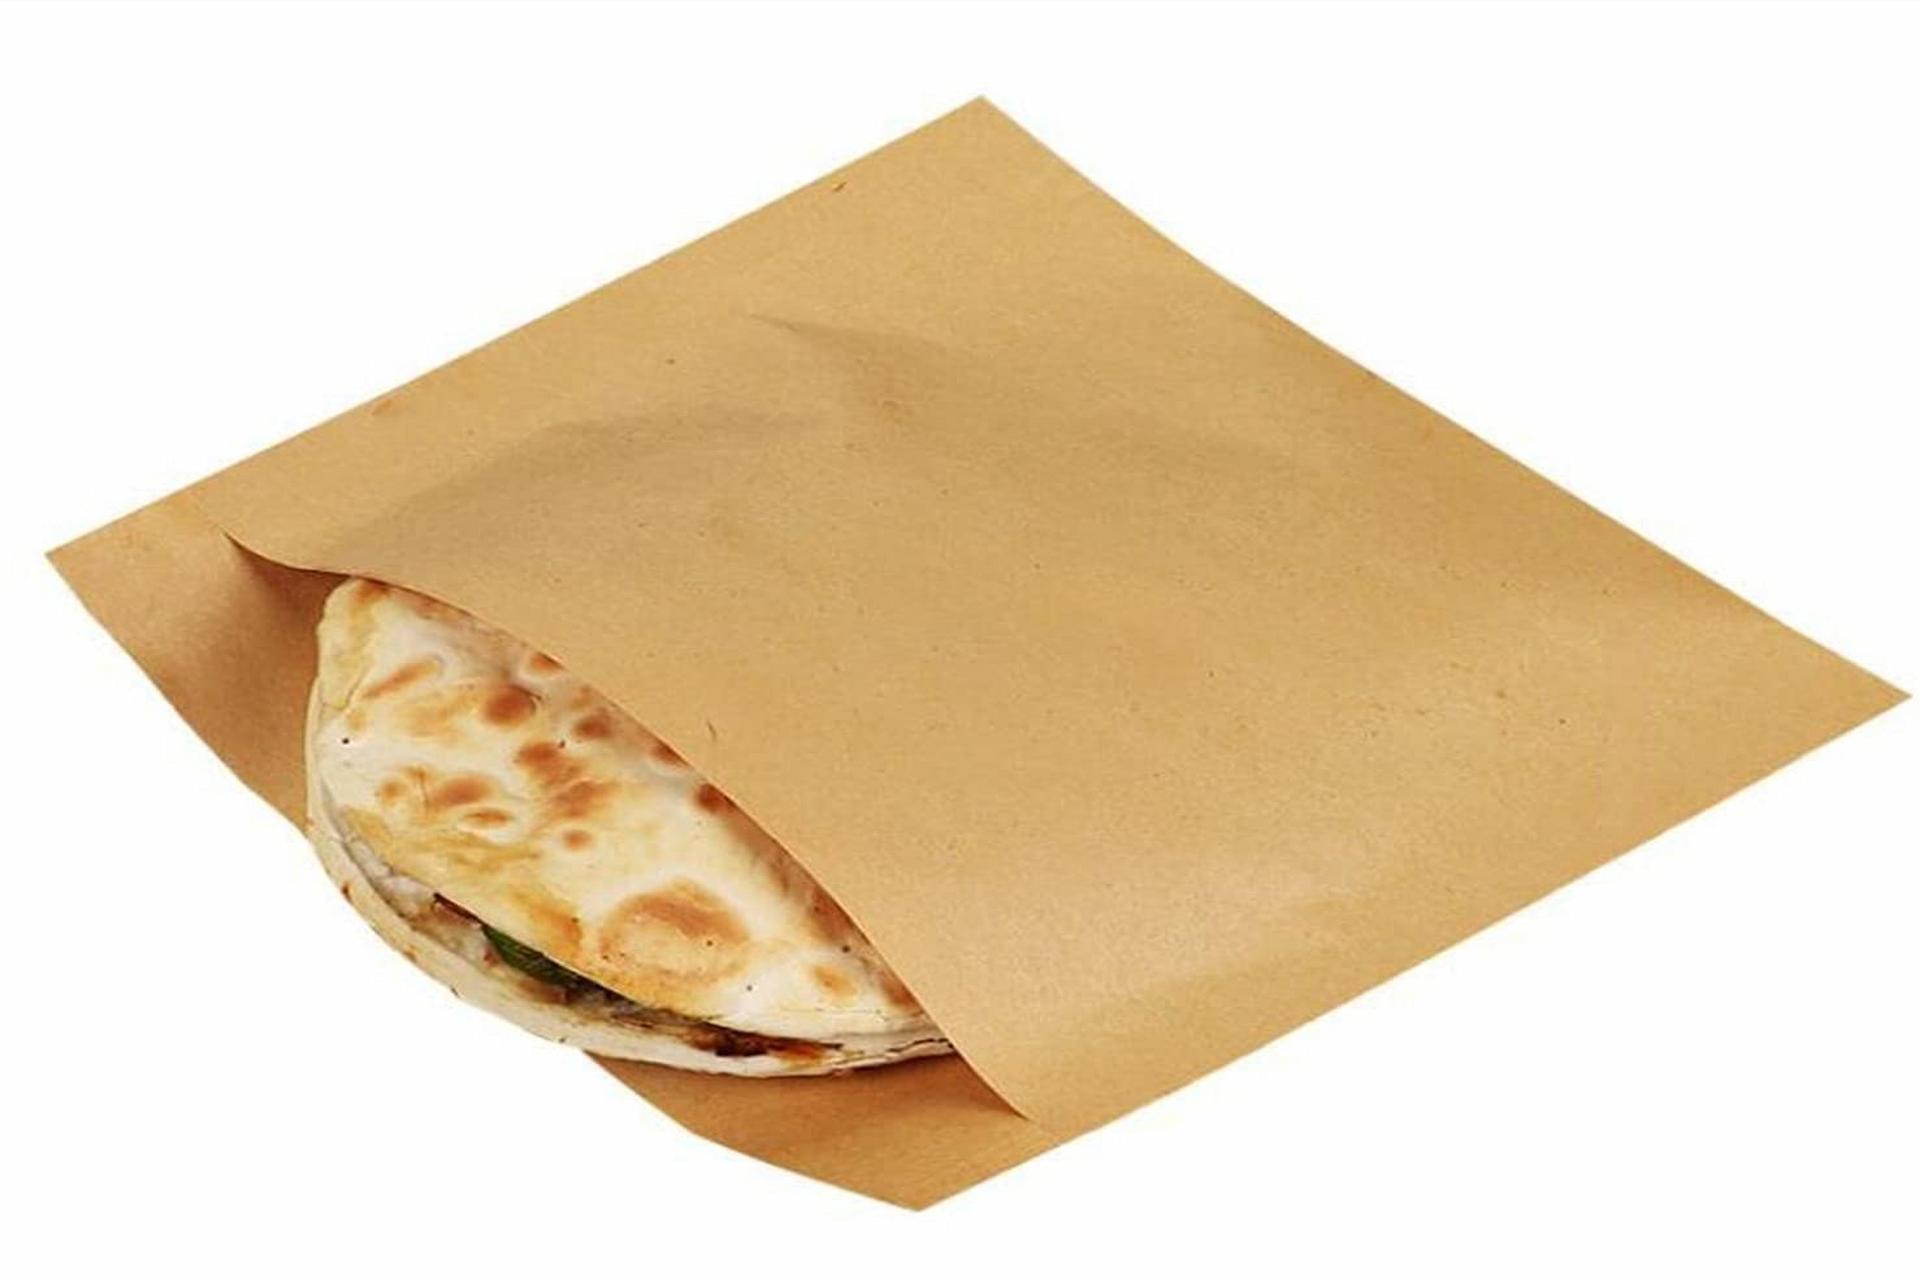 A Comprehensive Guide To Choosing The Right Paper Sandwich Bag For Your Needs